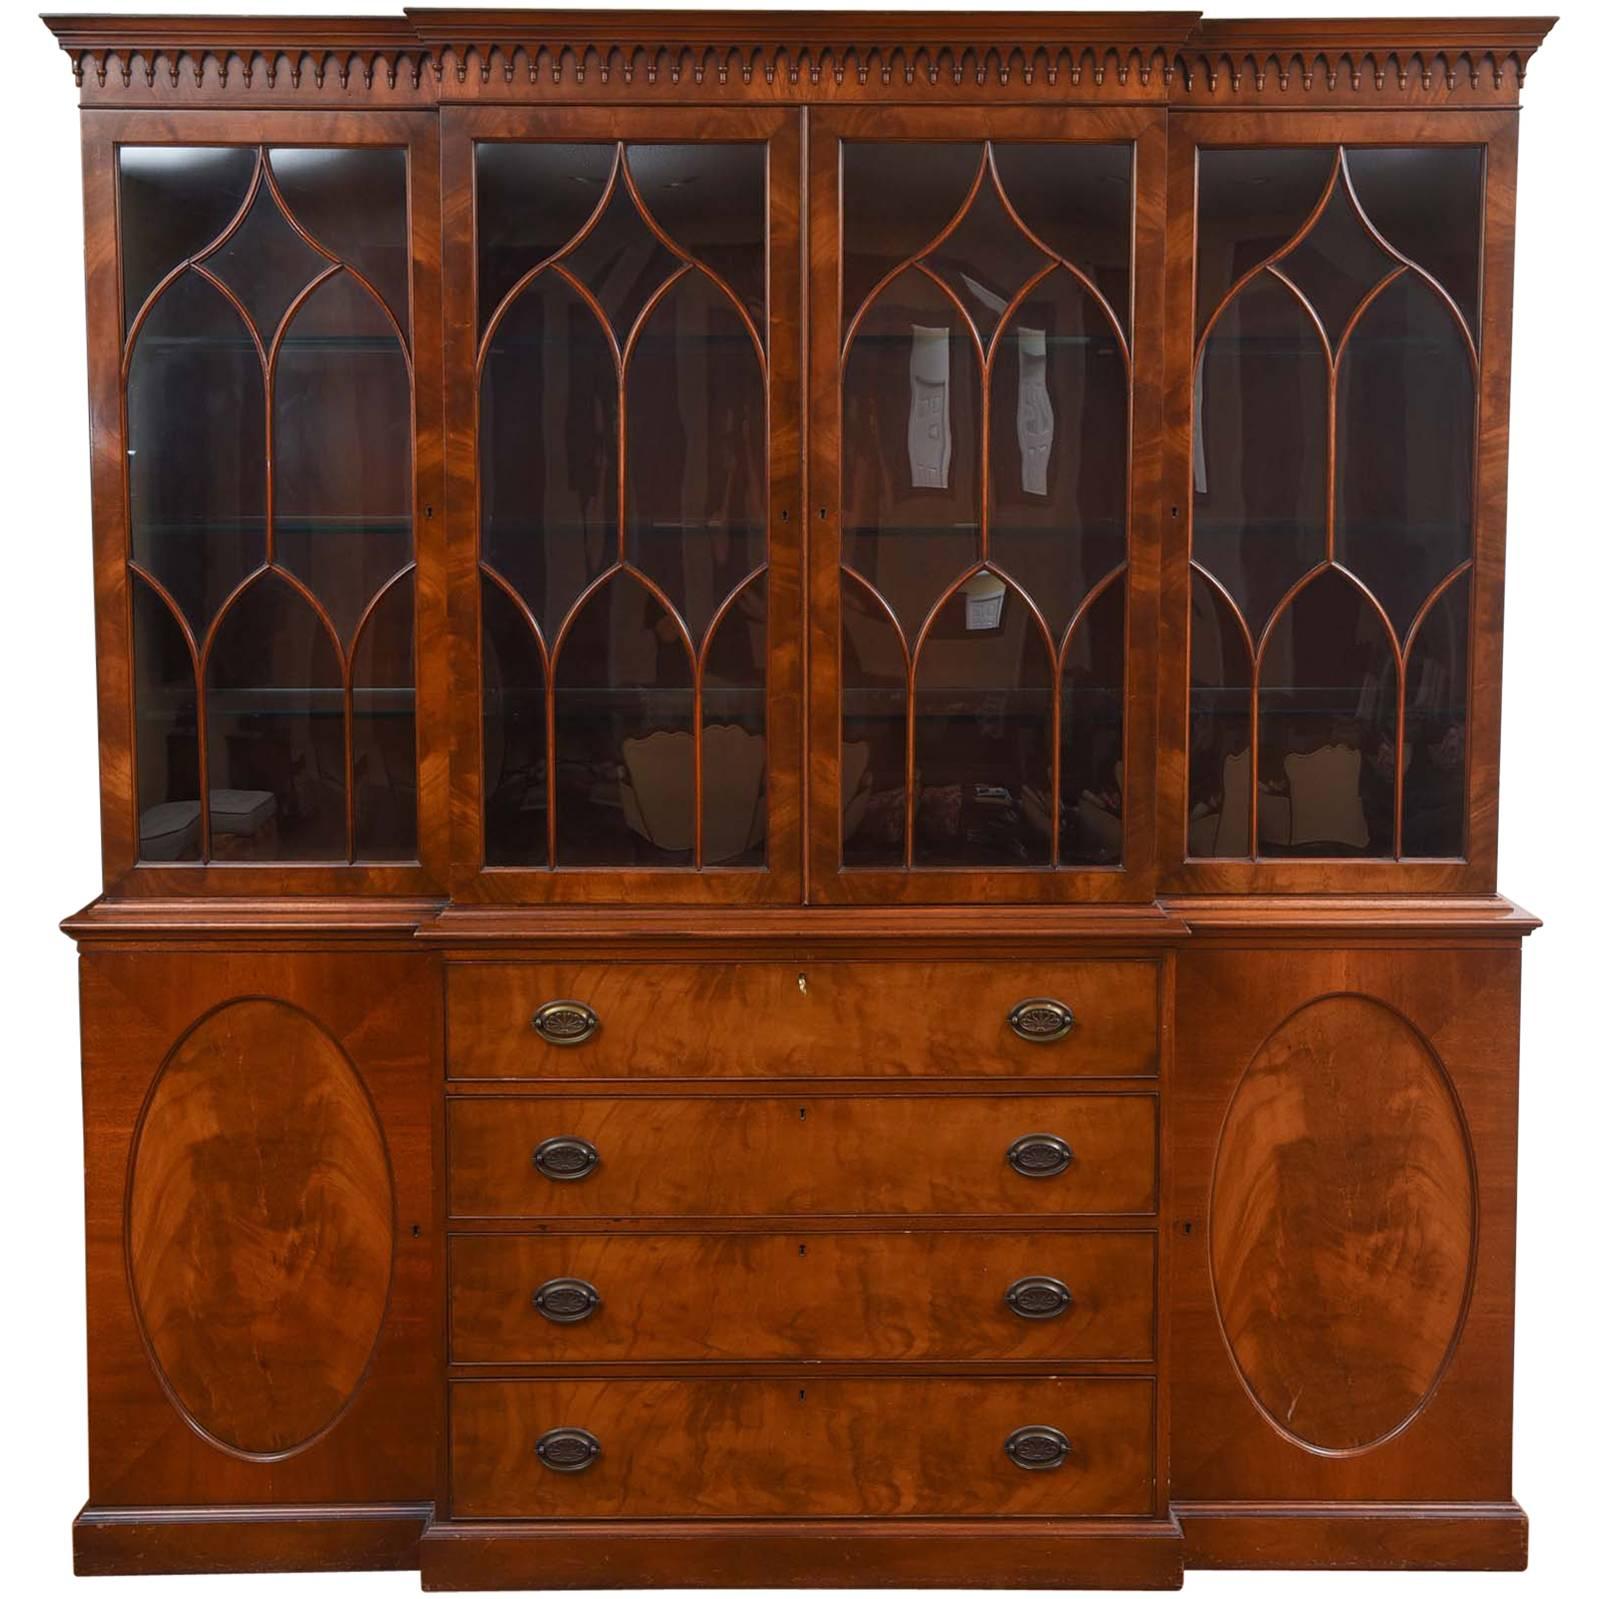 Massive Custom Semi Antique Breakfront Cabinet Mahogany Inlaid with Great Detail